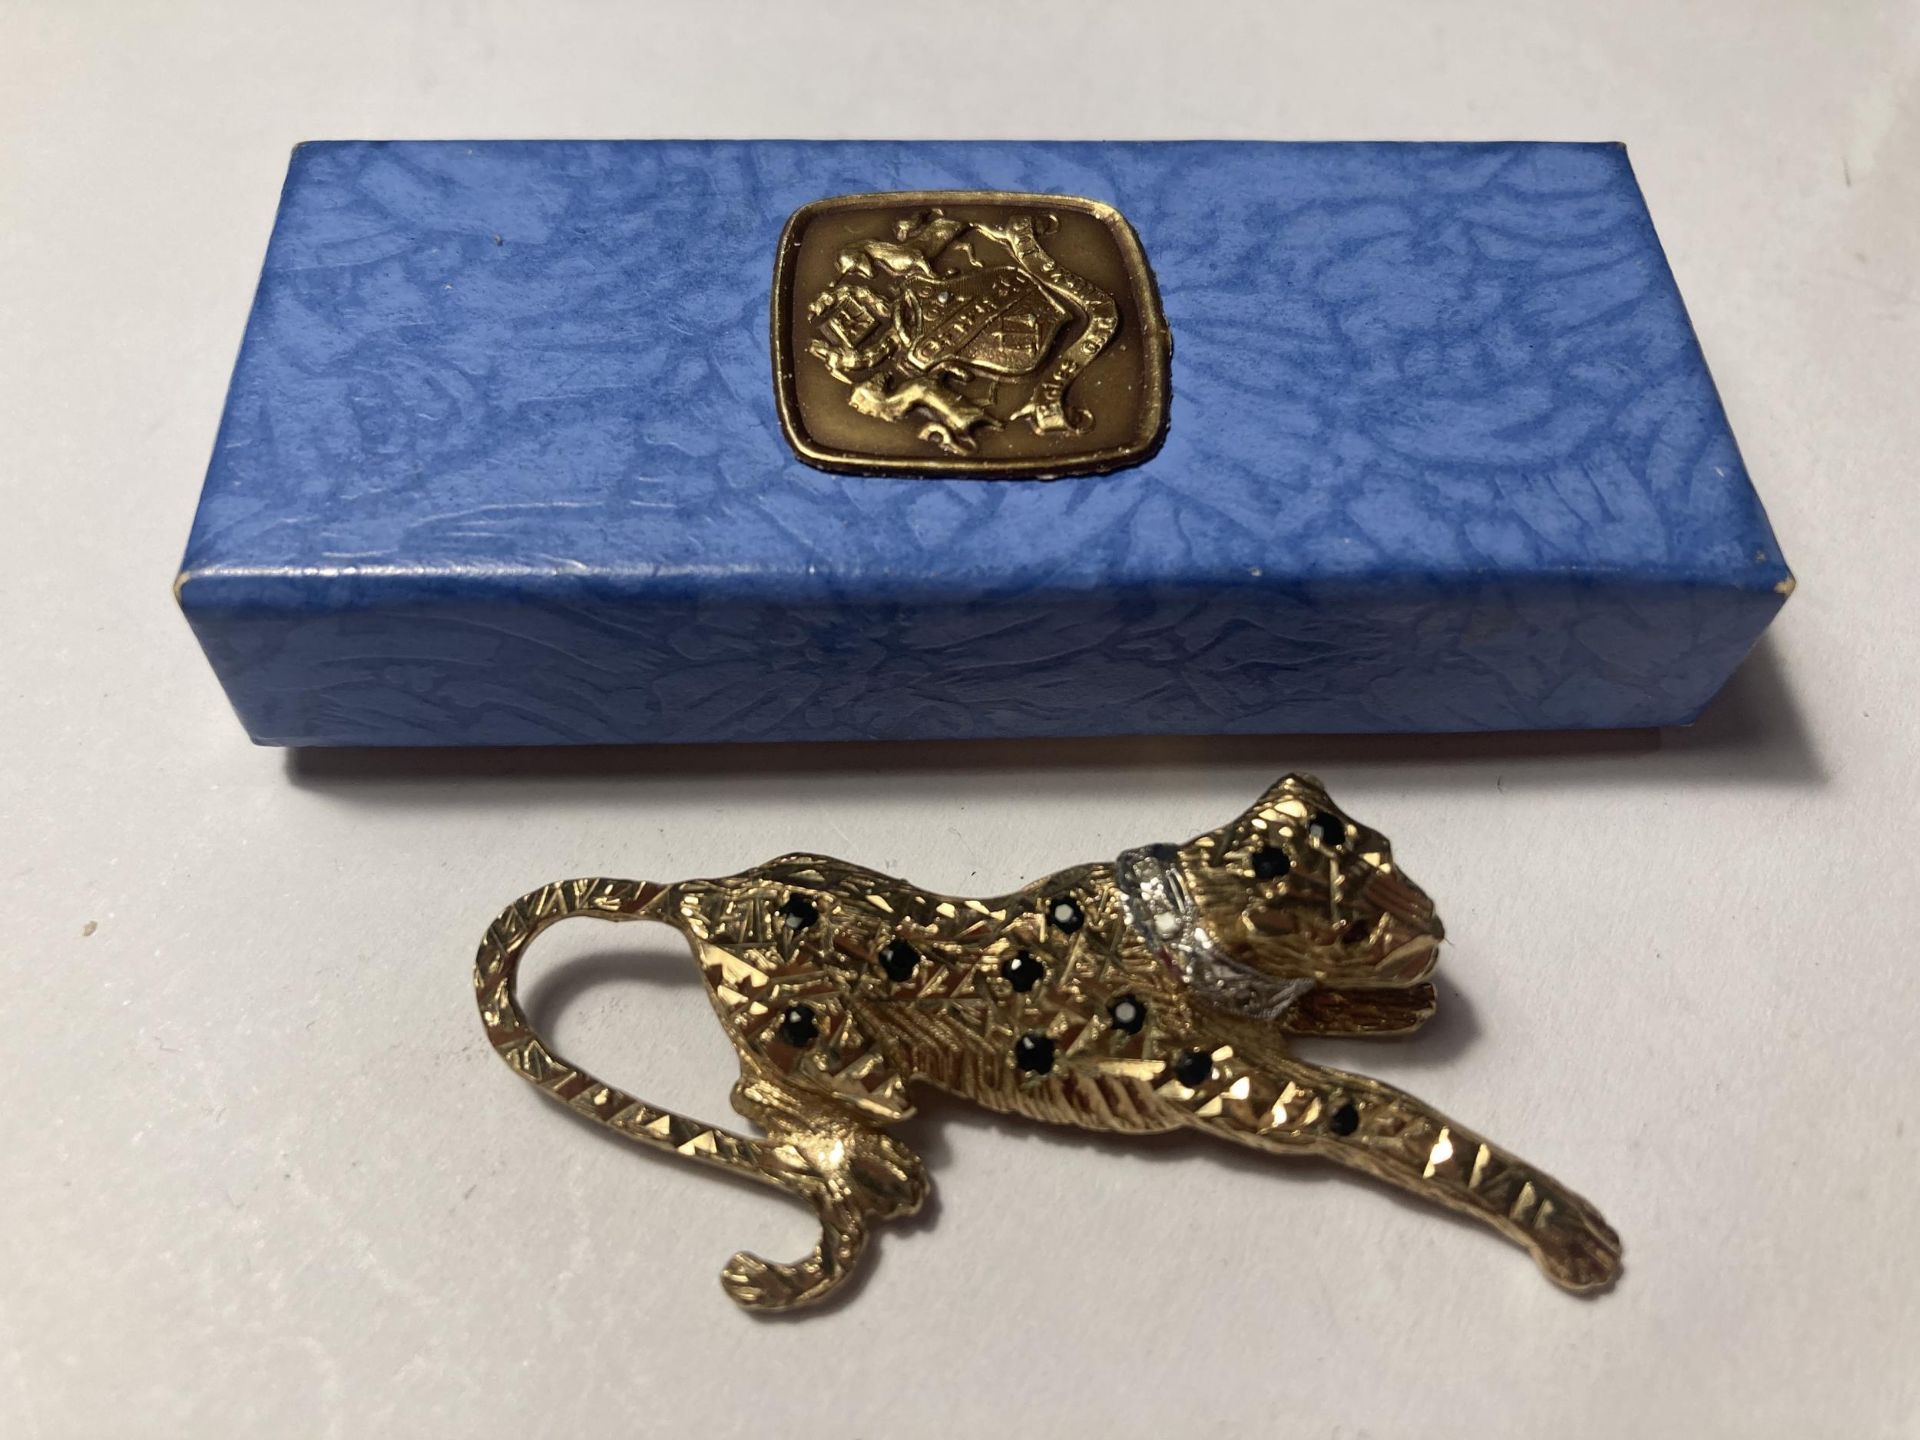 A MARKED 9 CARAT GOLD CARTIER STYLE LEOPARD BROOCH WITH SAPPHIRES, A DIAMOND COLLAR AND RUBY EYES IN